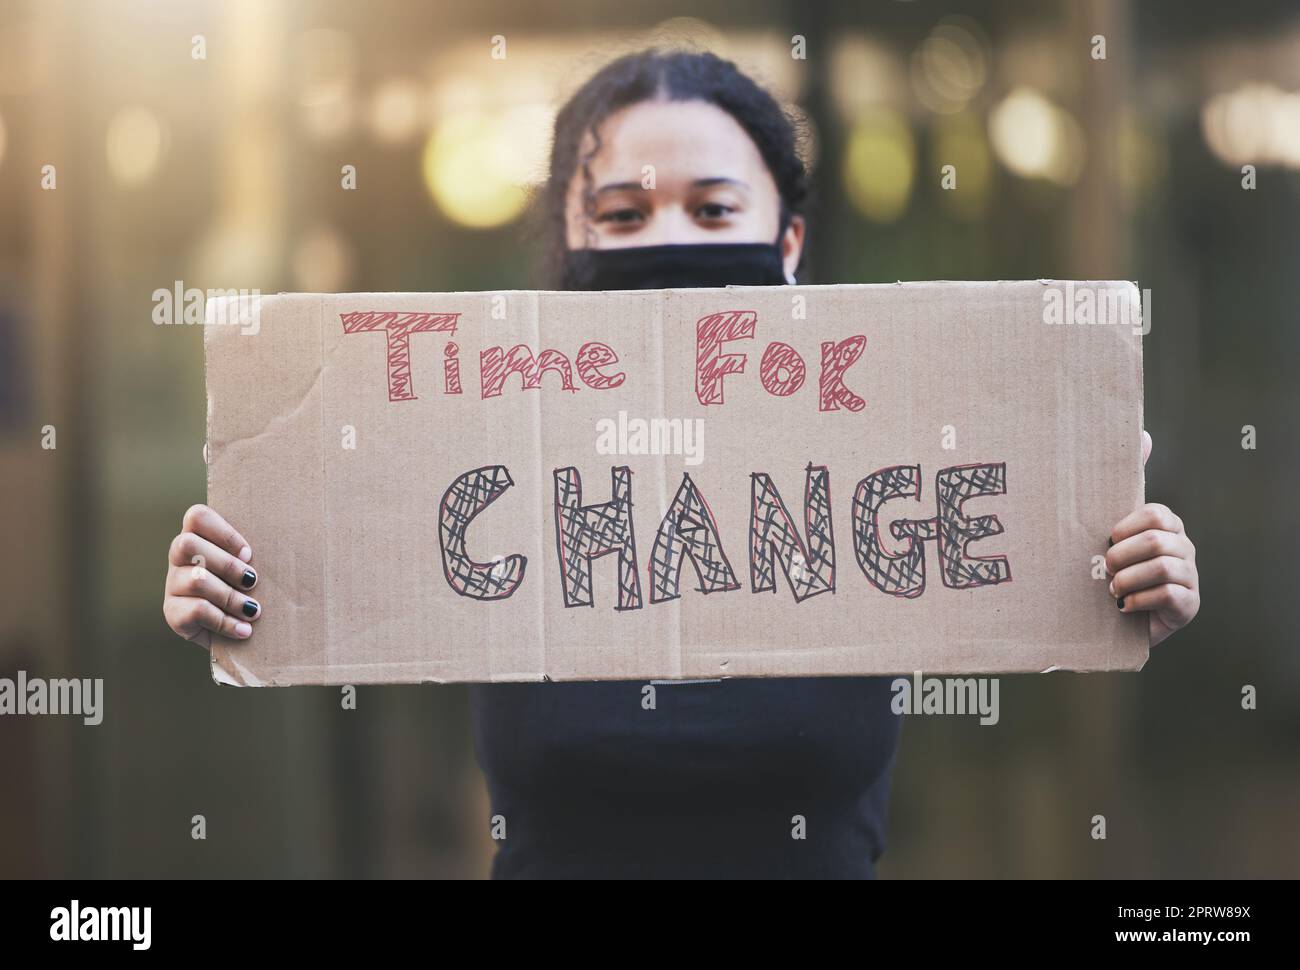 Woman, protest and sign for change in human rights, gender based violence or equality against a bokeh background. Female activist protesting holding billboard message to voice community improvement Stock Photo